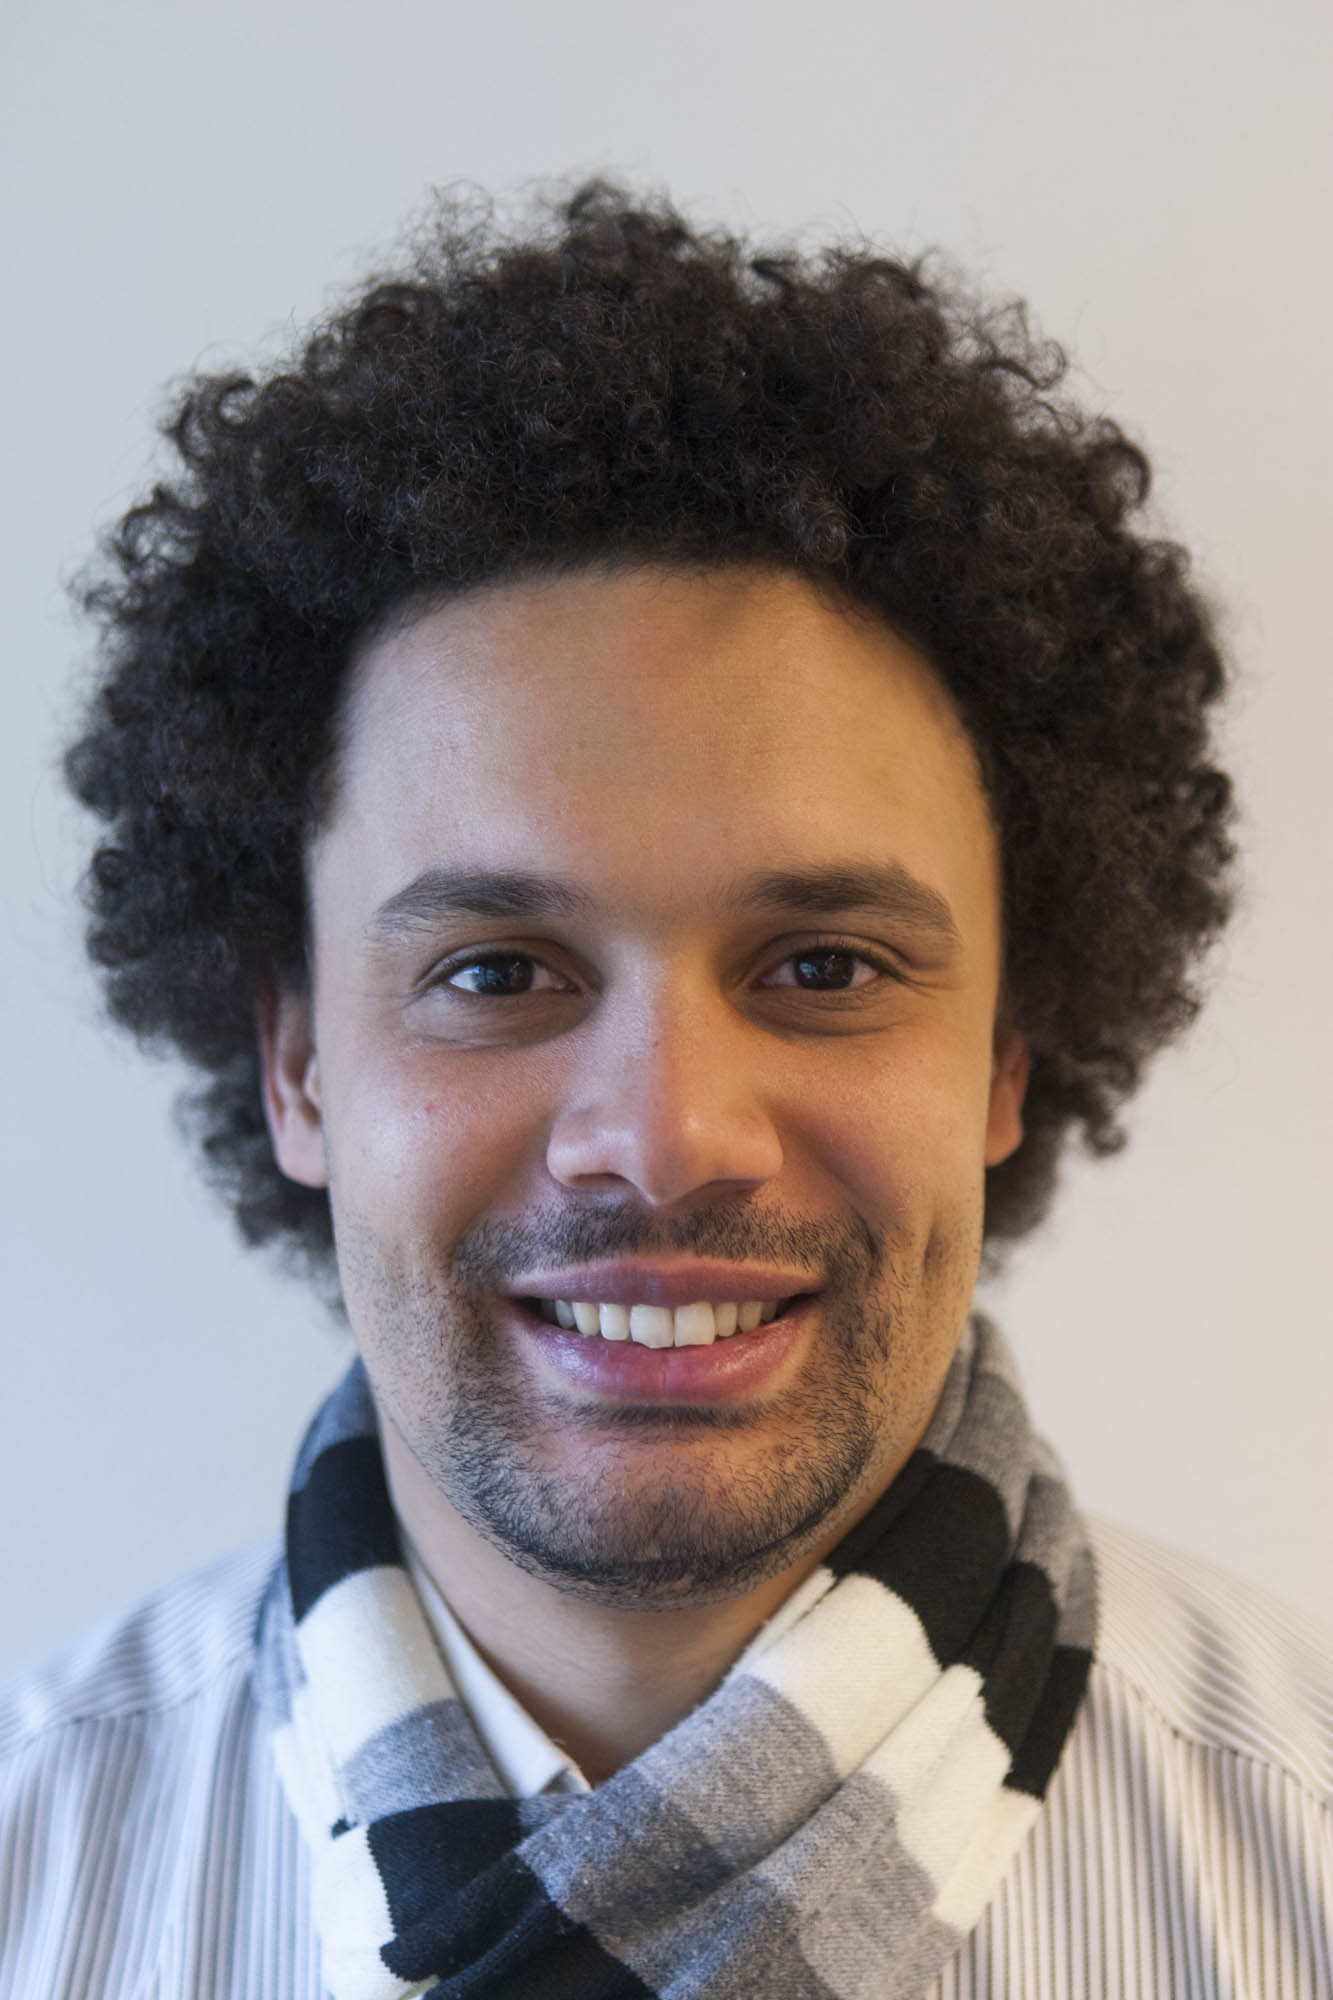 Valério Ribeiro (UA/IT) is originally from Maputo,
	  Mozambique. He holds a PhD in Astrophysics (2011) from Liverpool John Moores University and has since held positions across Africa and Europe. His reserch interests
	  are on astrophysical transients having worked primarily on modelling Novae.